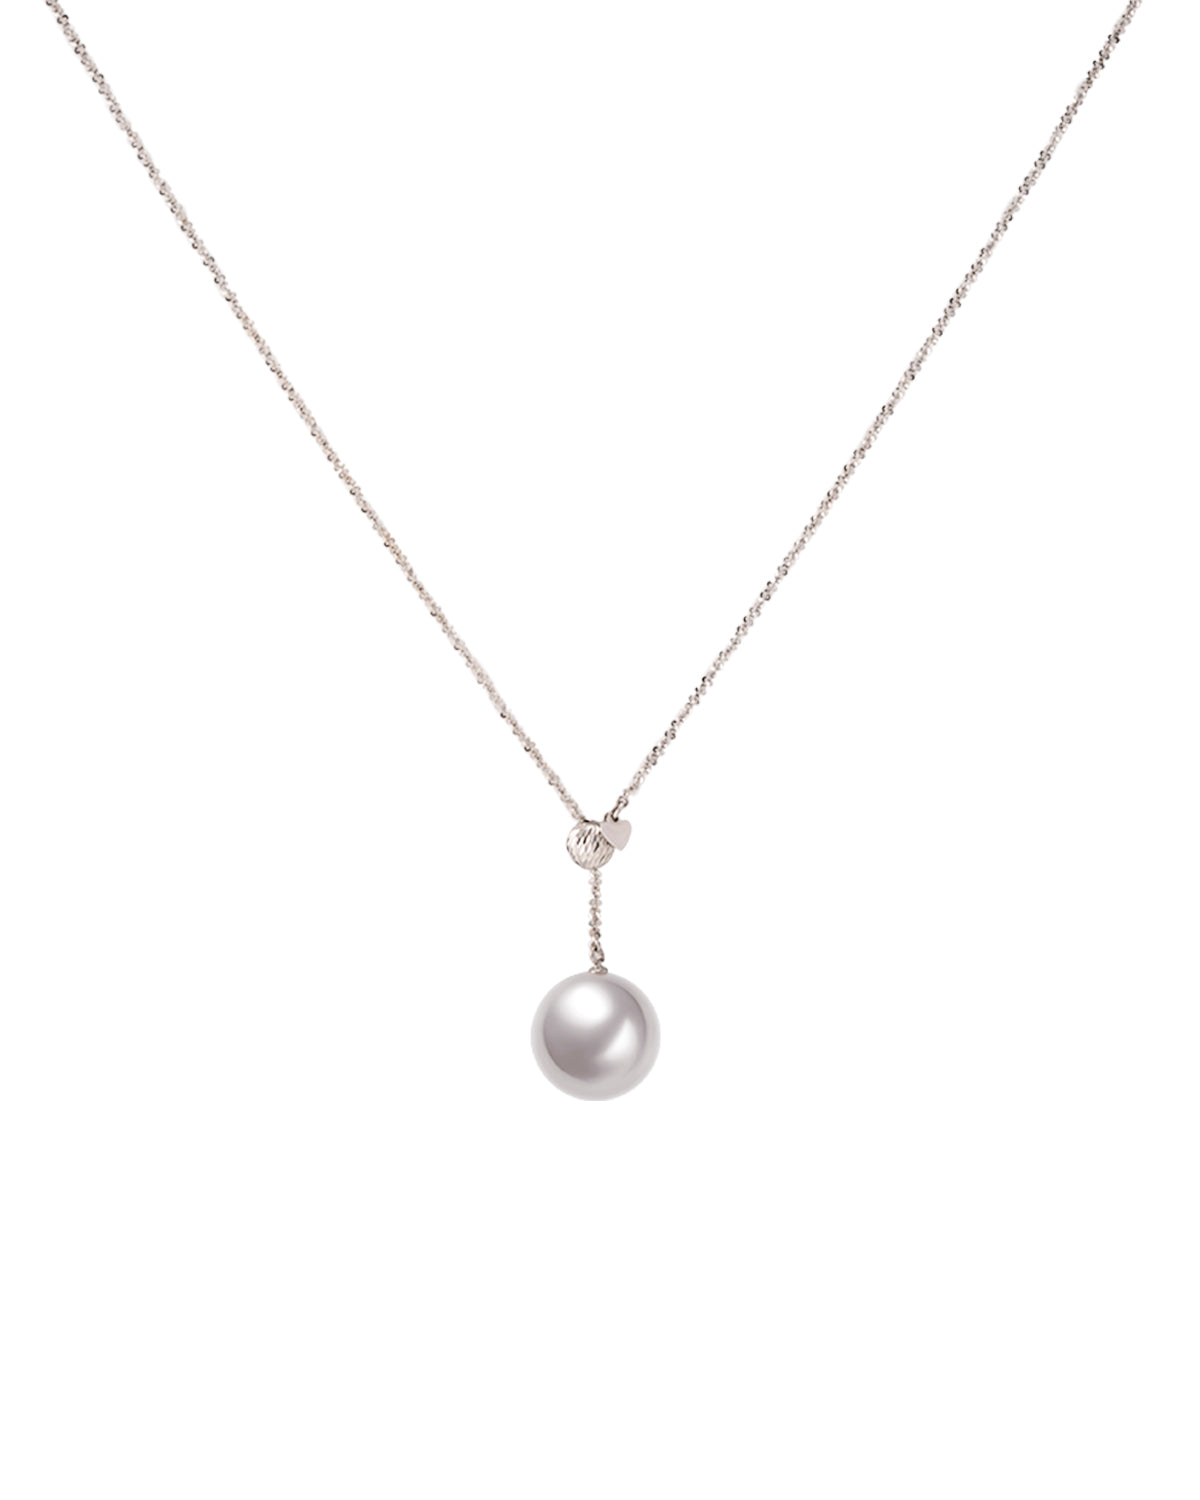 12-13mm White South Sea Pearl Platinum Necklace